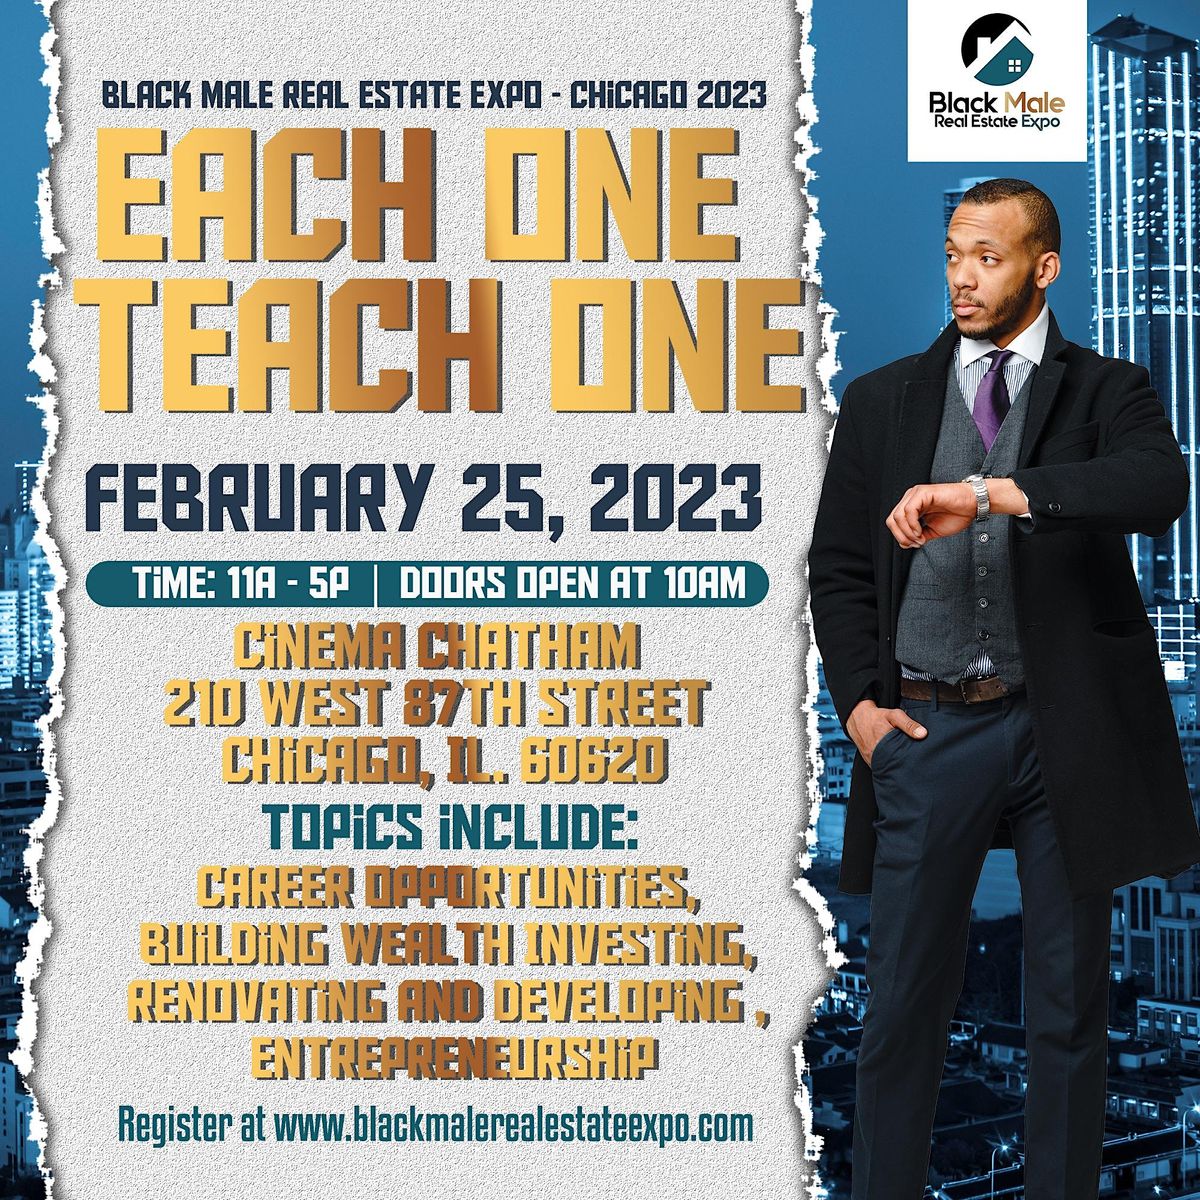 Black Male Real Estate Expo - Chicago 2023